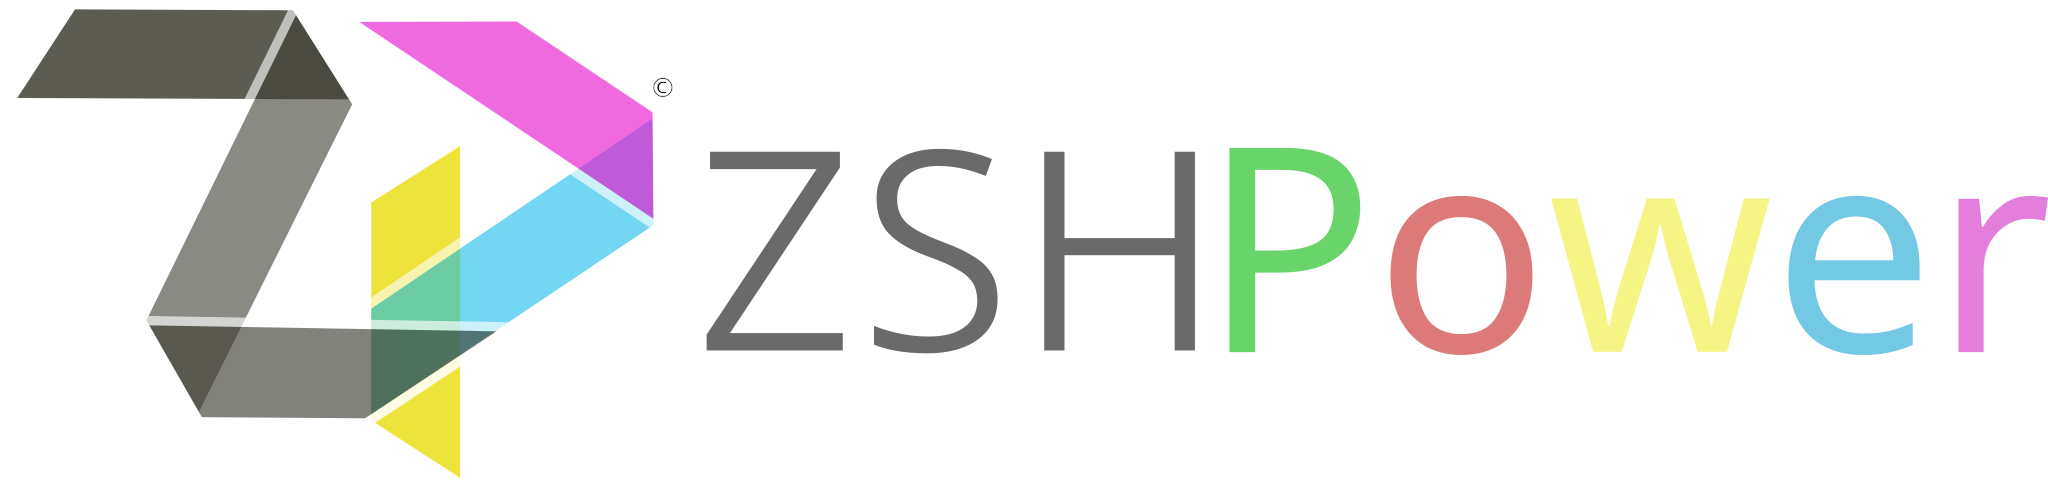 zshpower - Optimized for python developers. Includes git and pyenv status decorations, username and host. Tries to install other plugins and fonts, so read its instructions before installing.